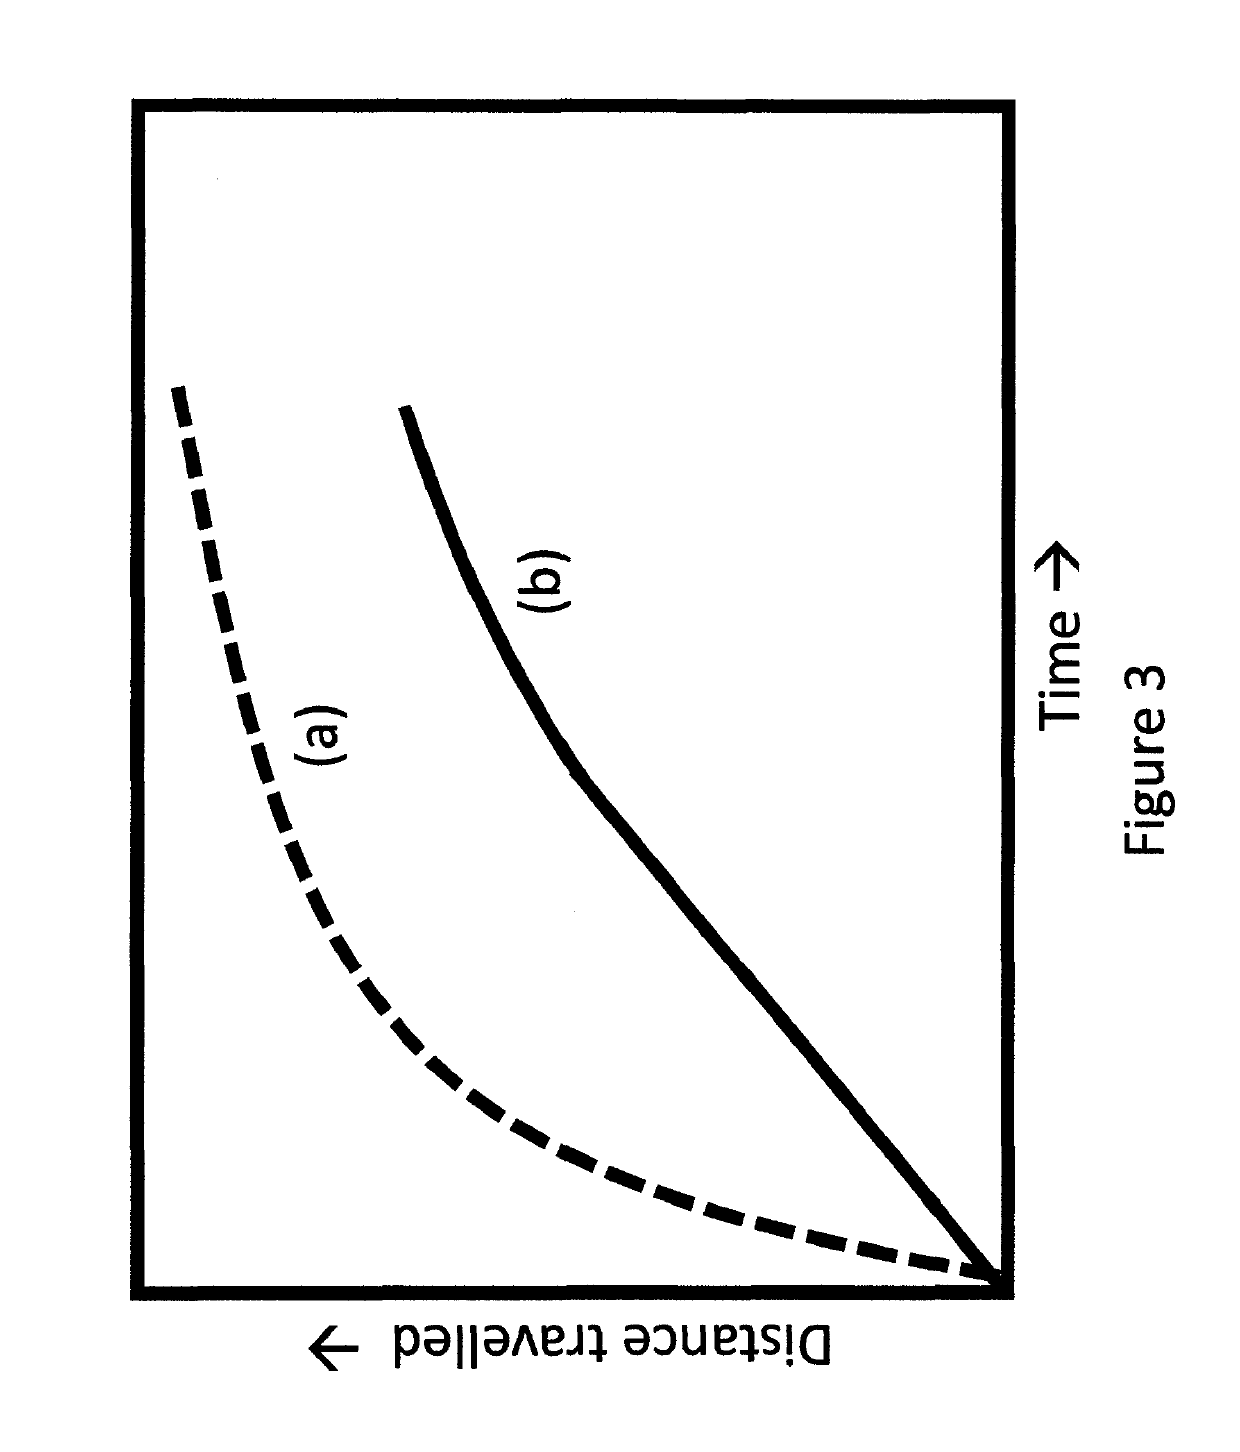 Indicating devices based on lateral diffusion of a mobile phase through a non-porous stationary phase